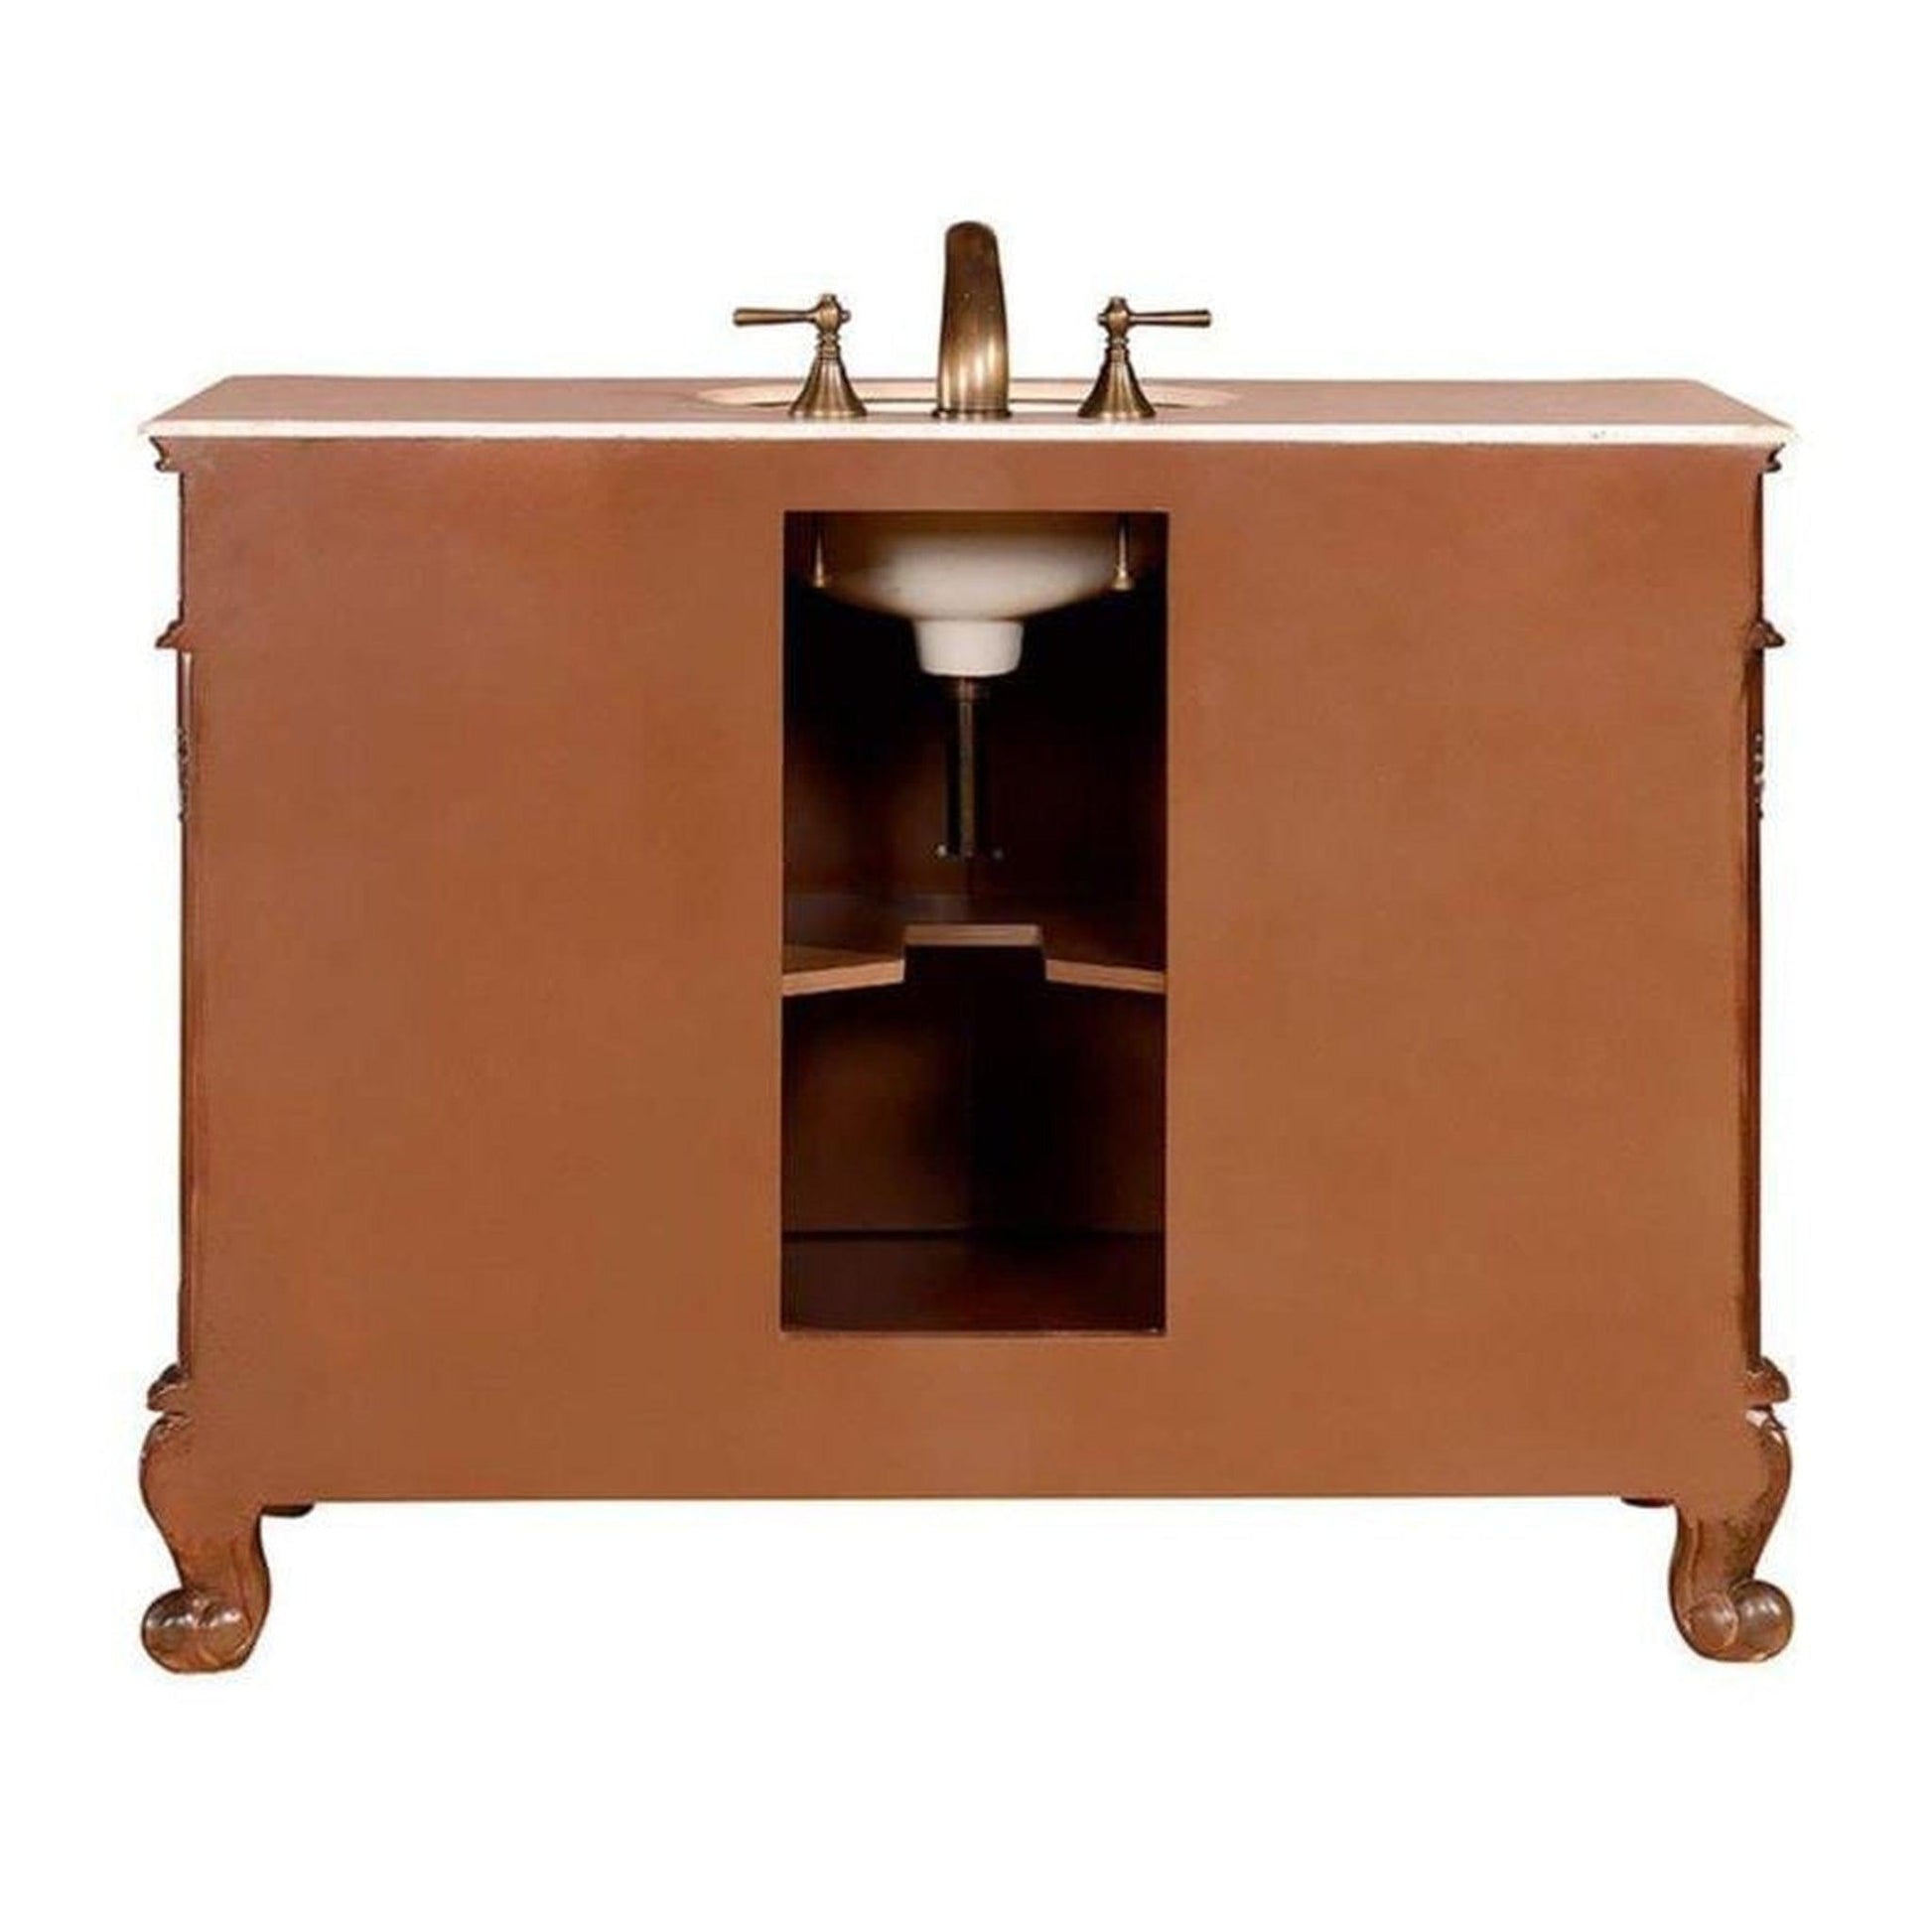 Silkroad Exclusive 48" Single Sink English Chestnut Bathroom Vanity With Crema Marfil Marble Countertop and White Ceramic Undermount Sink